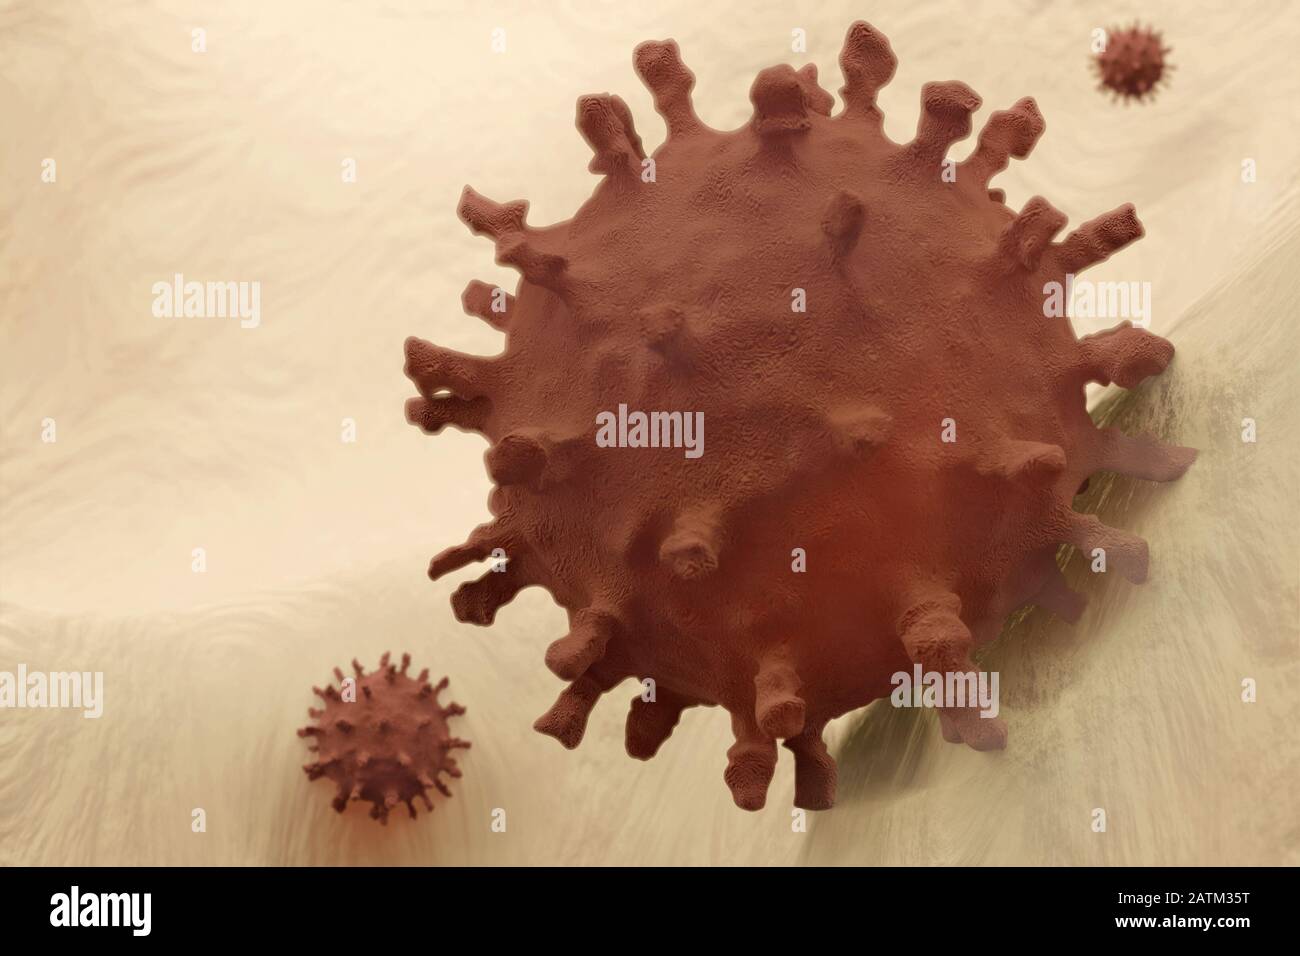 Scientific illustration of the Corona virus, 3D render based on microscopic images of the virus from th 2020 China outbreak Stock Photo